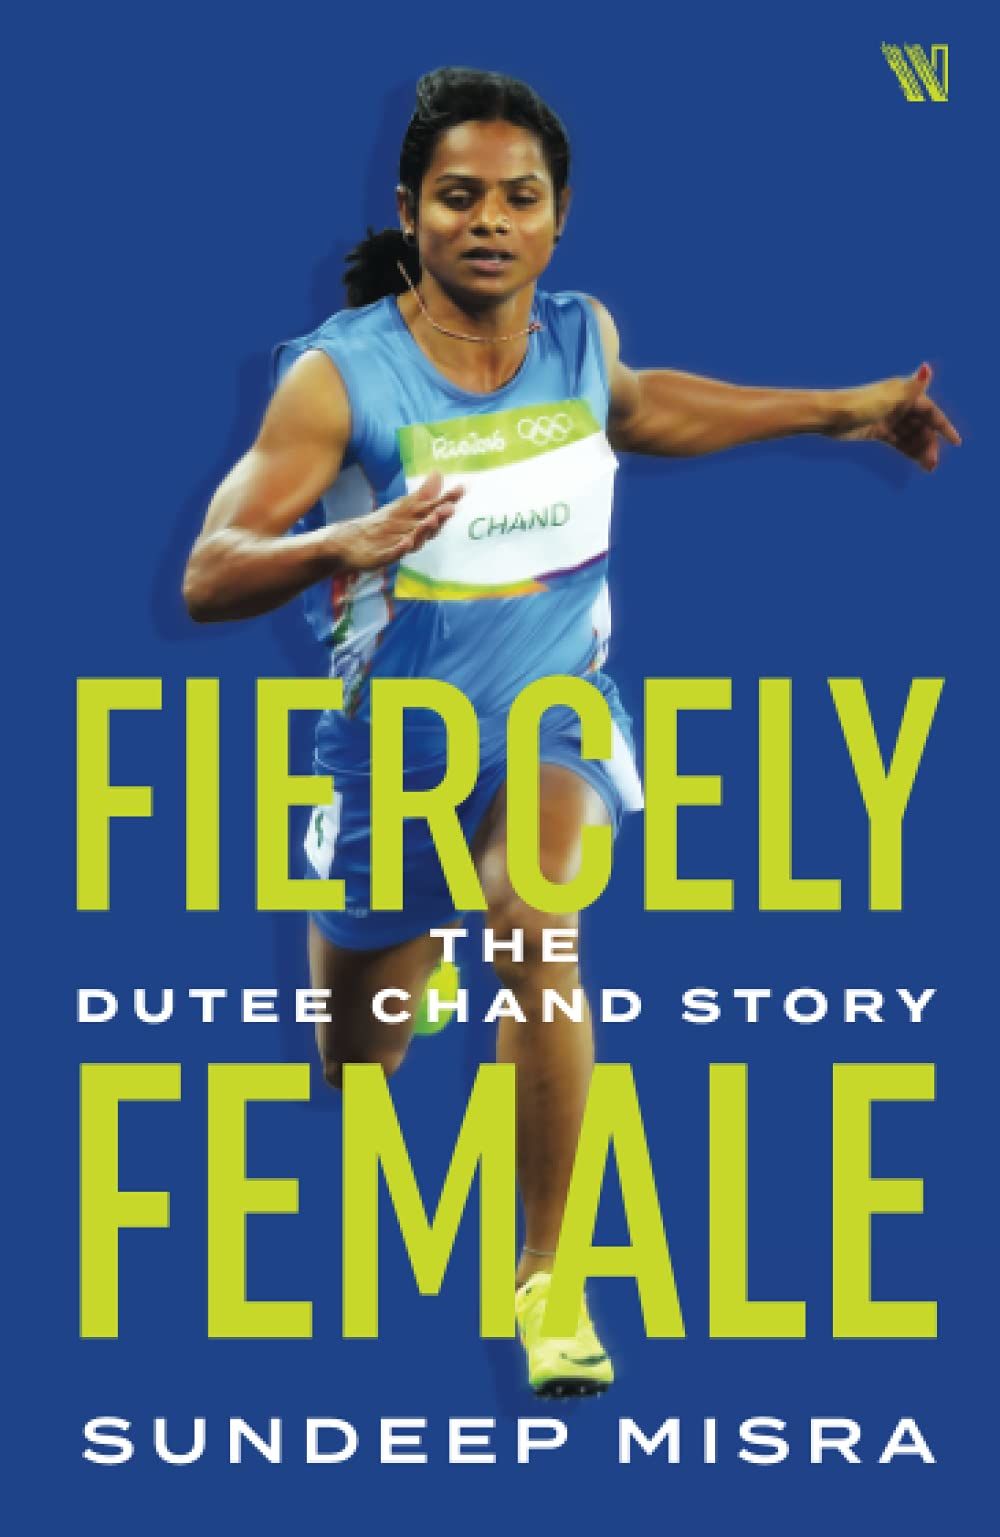 “Fiercely Female: The Dutee Chand Story”